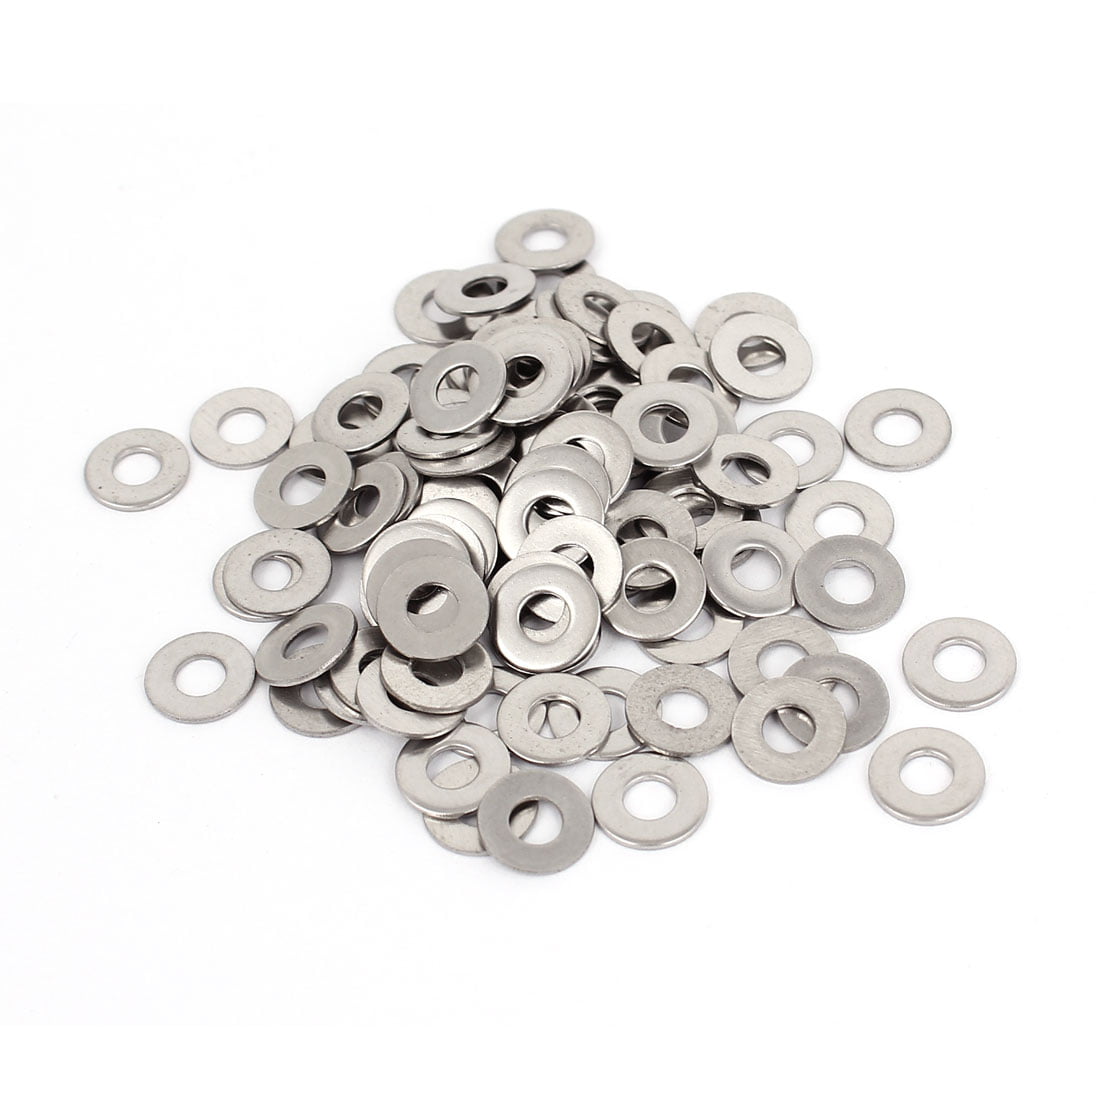 10 M8 OR 8mm Metric Stainless Steel EXTRA THICK HEAVY DUTY Flat Washers 